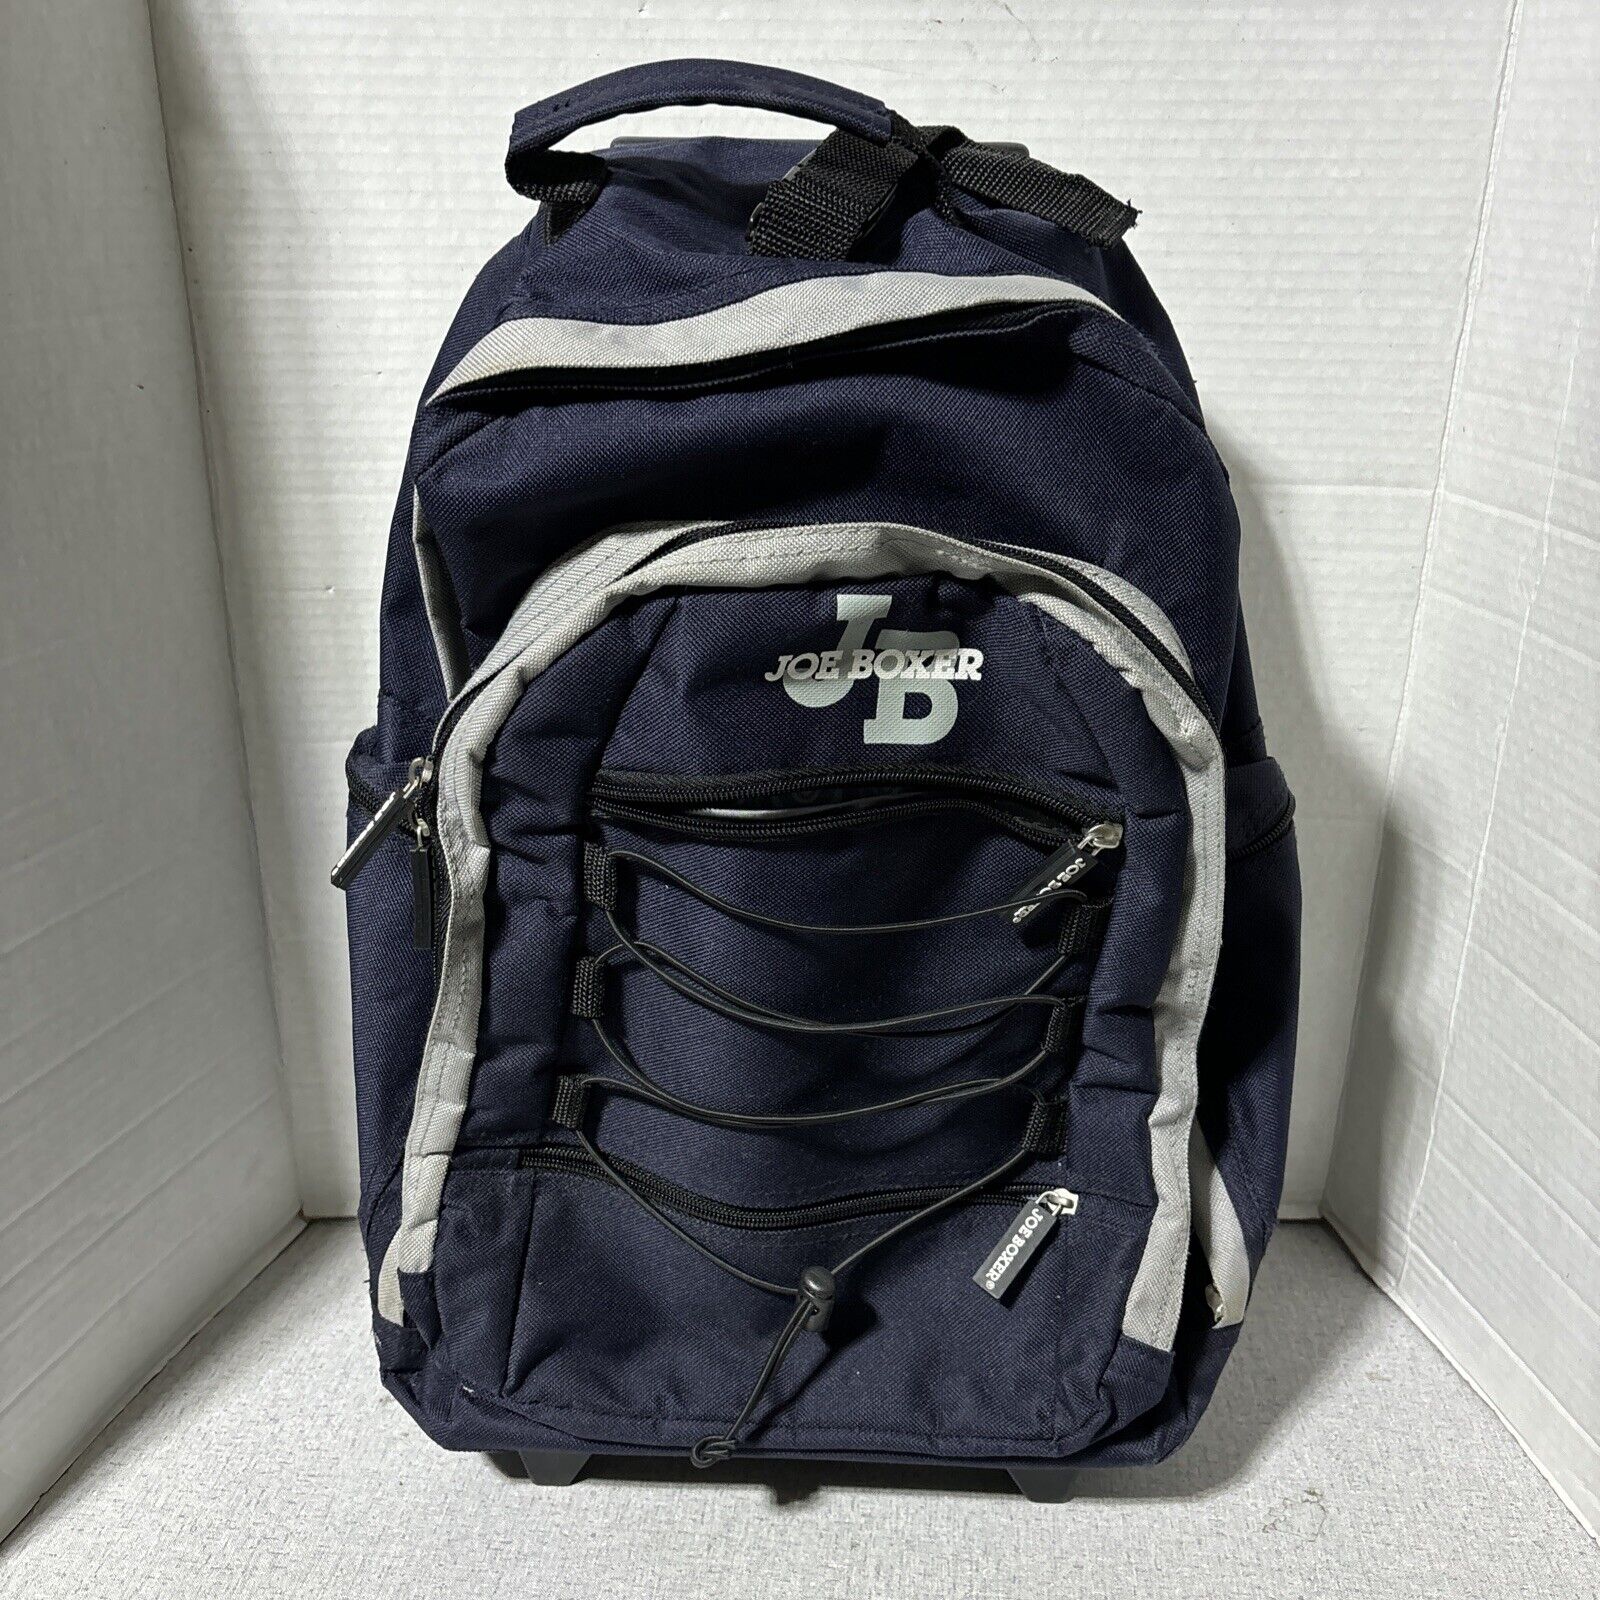 Joe Boxer Rolling Backpack 20” X 14” Or 32” With Handle Out, All Zippers Work